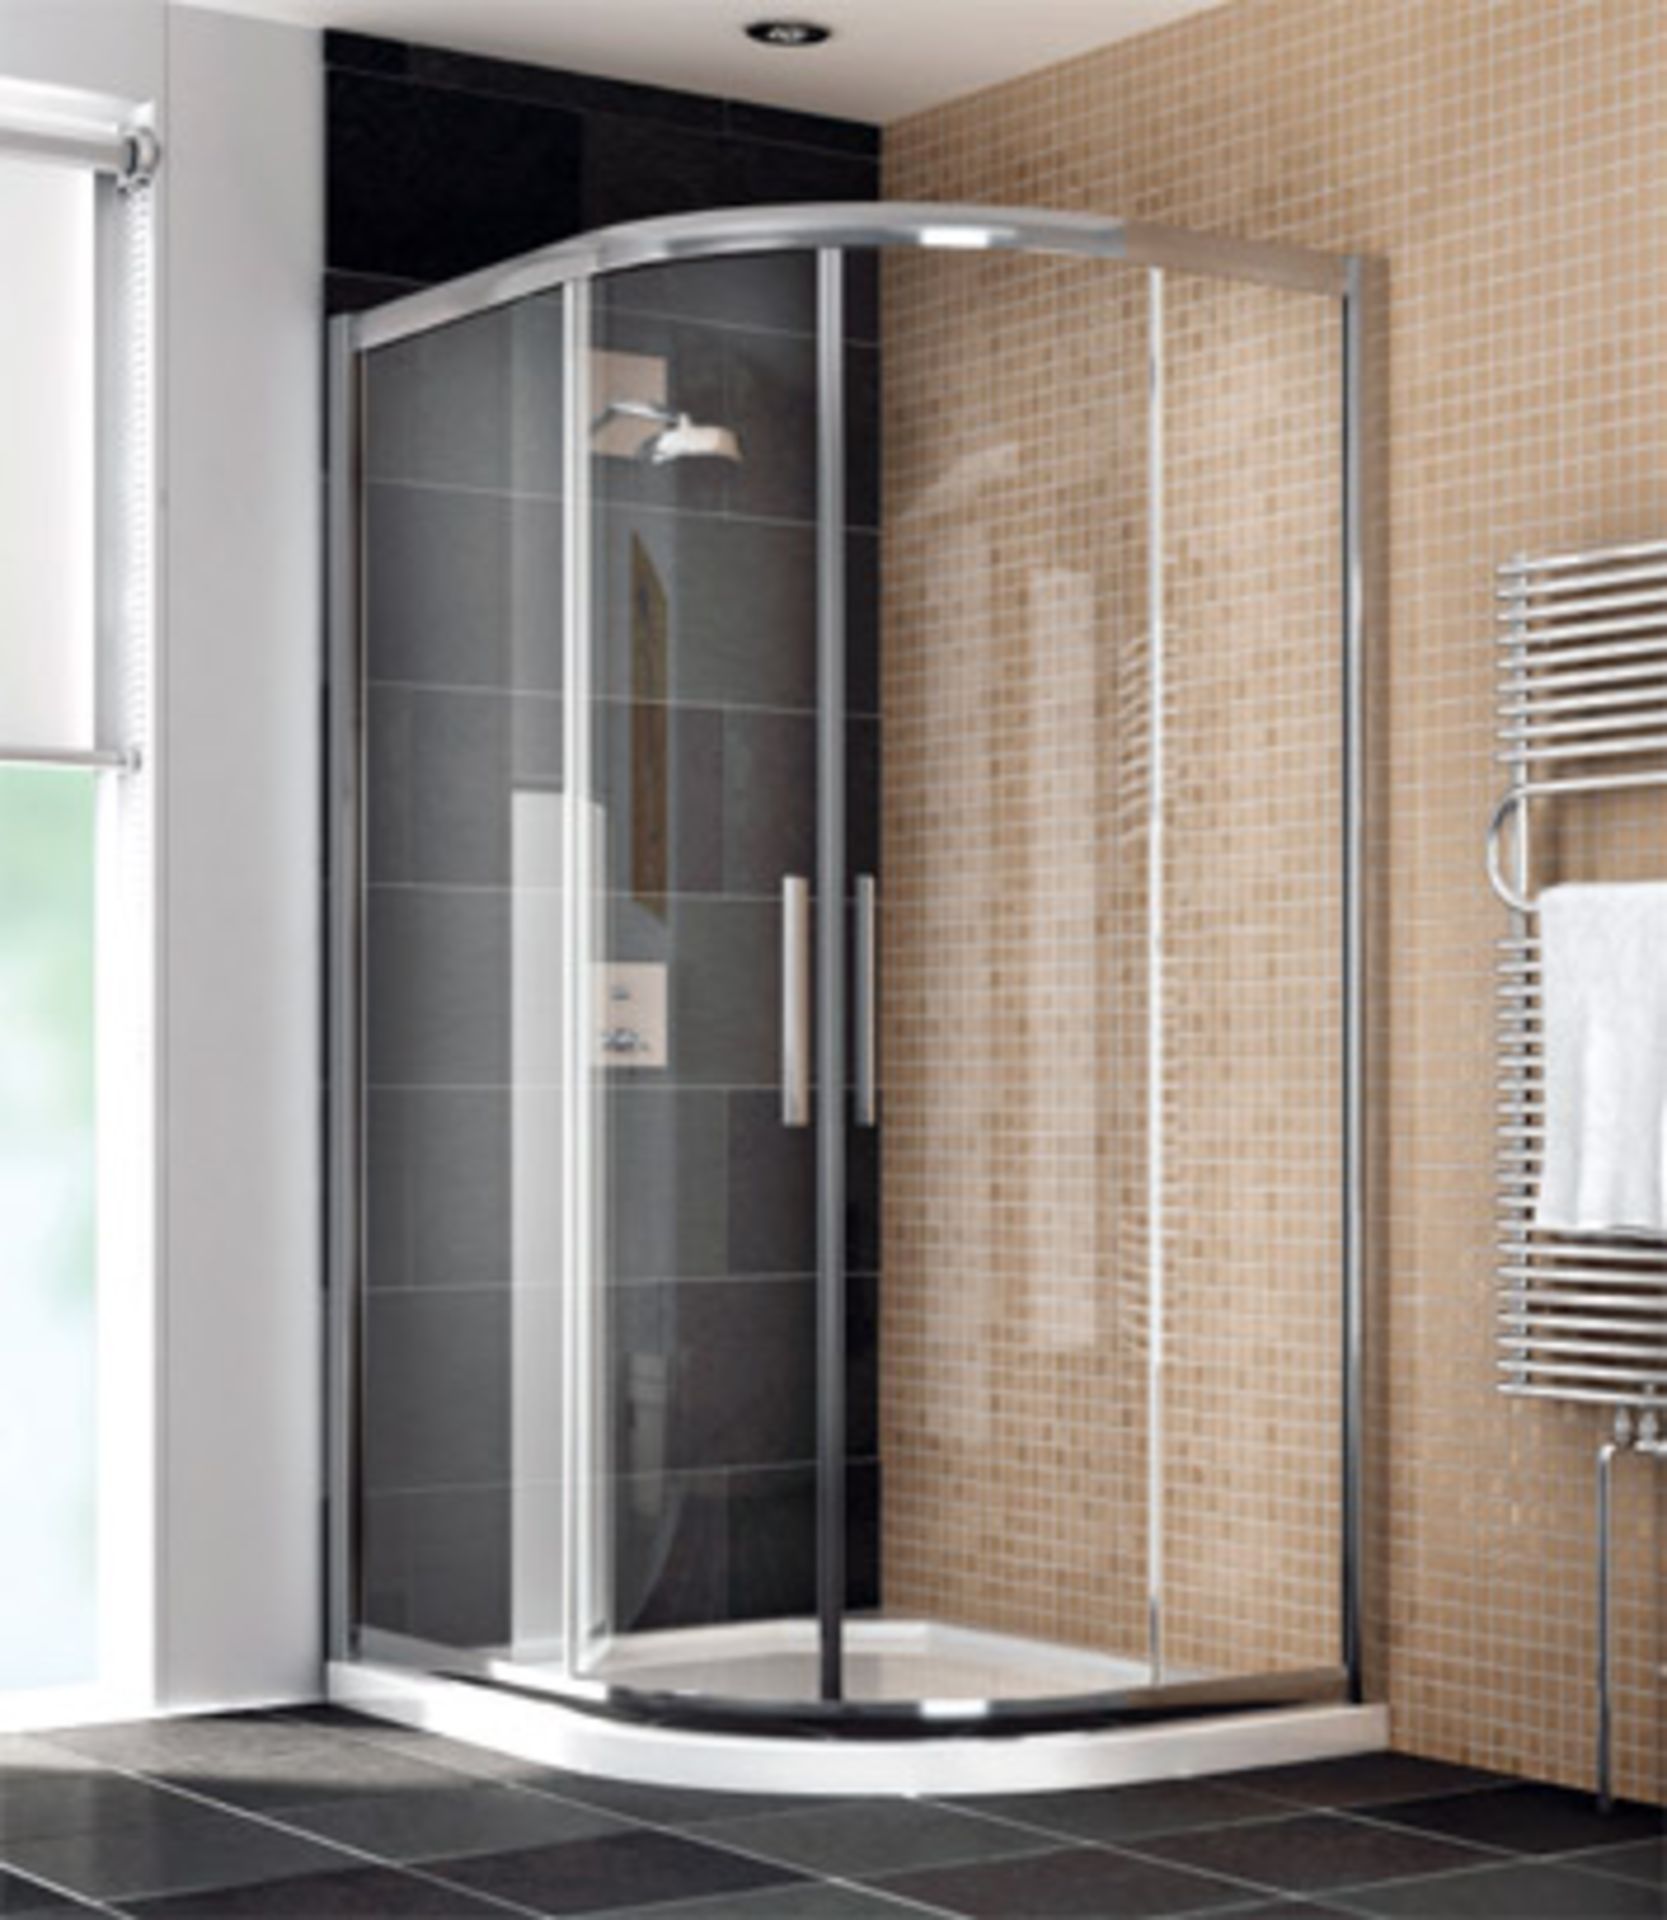 Manhattan glass Quad shower enclosure (no Tray), 1000x800m, unused and boxed, comes in 2 boxes which